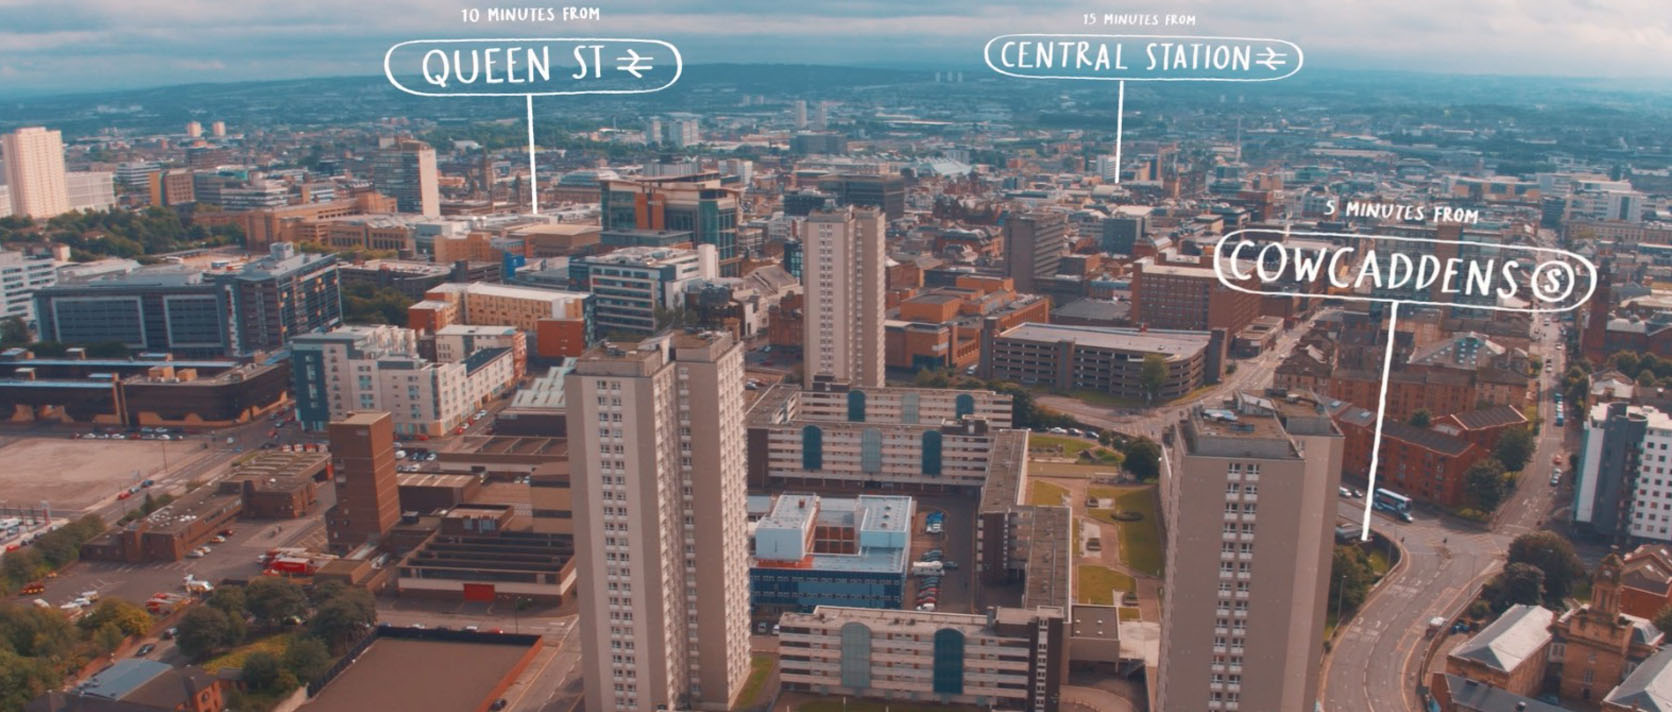 Glasgow Canal Project - Central Cowcaddens Queen St Video